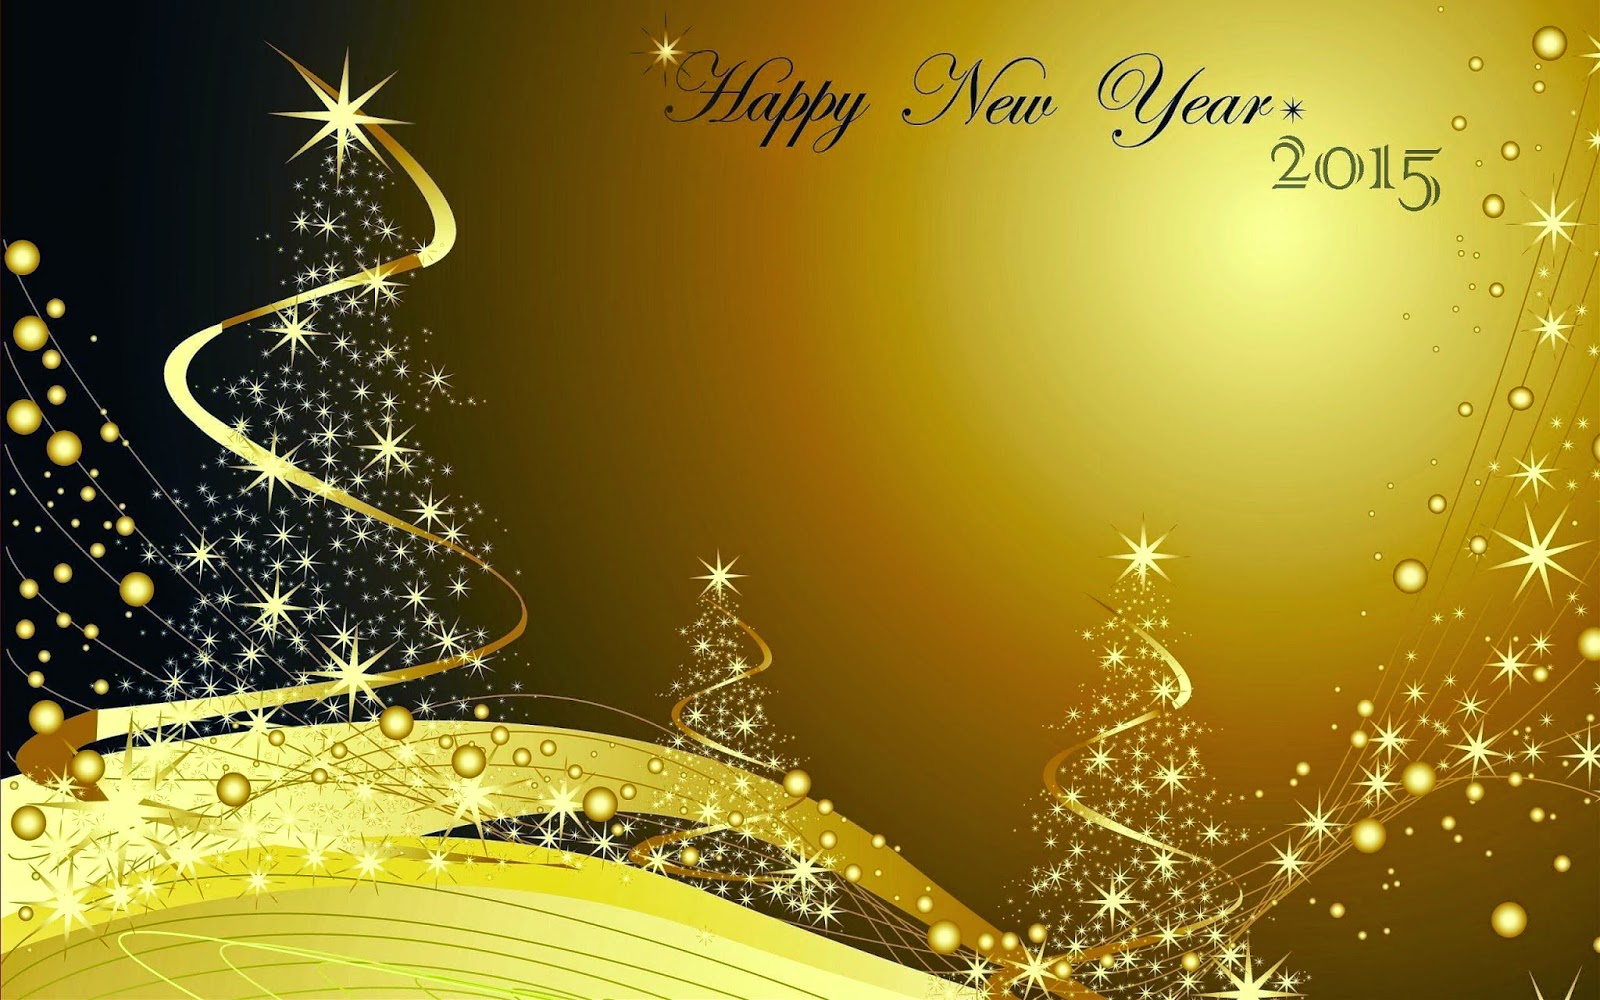 happy new year 2015 abstract golden theme background with stars xmas